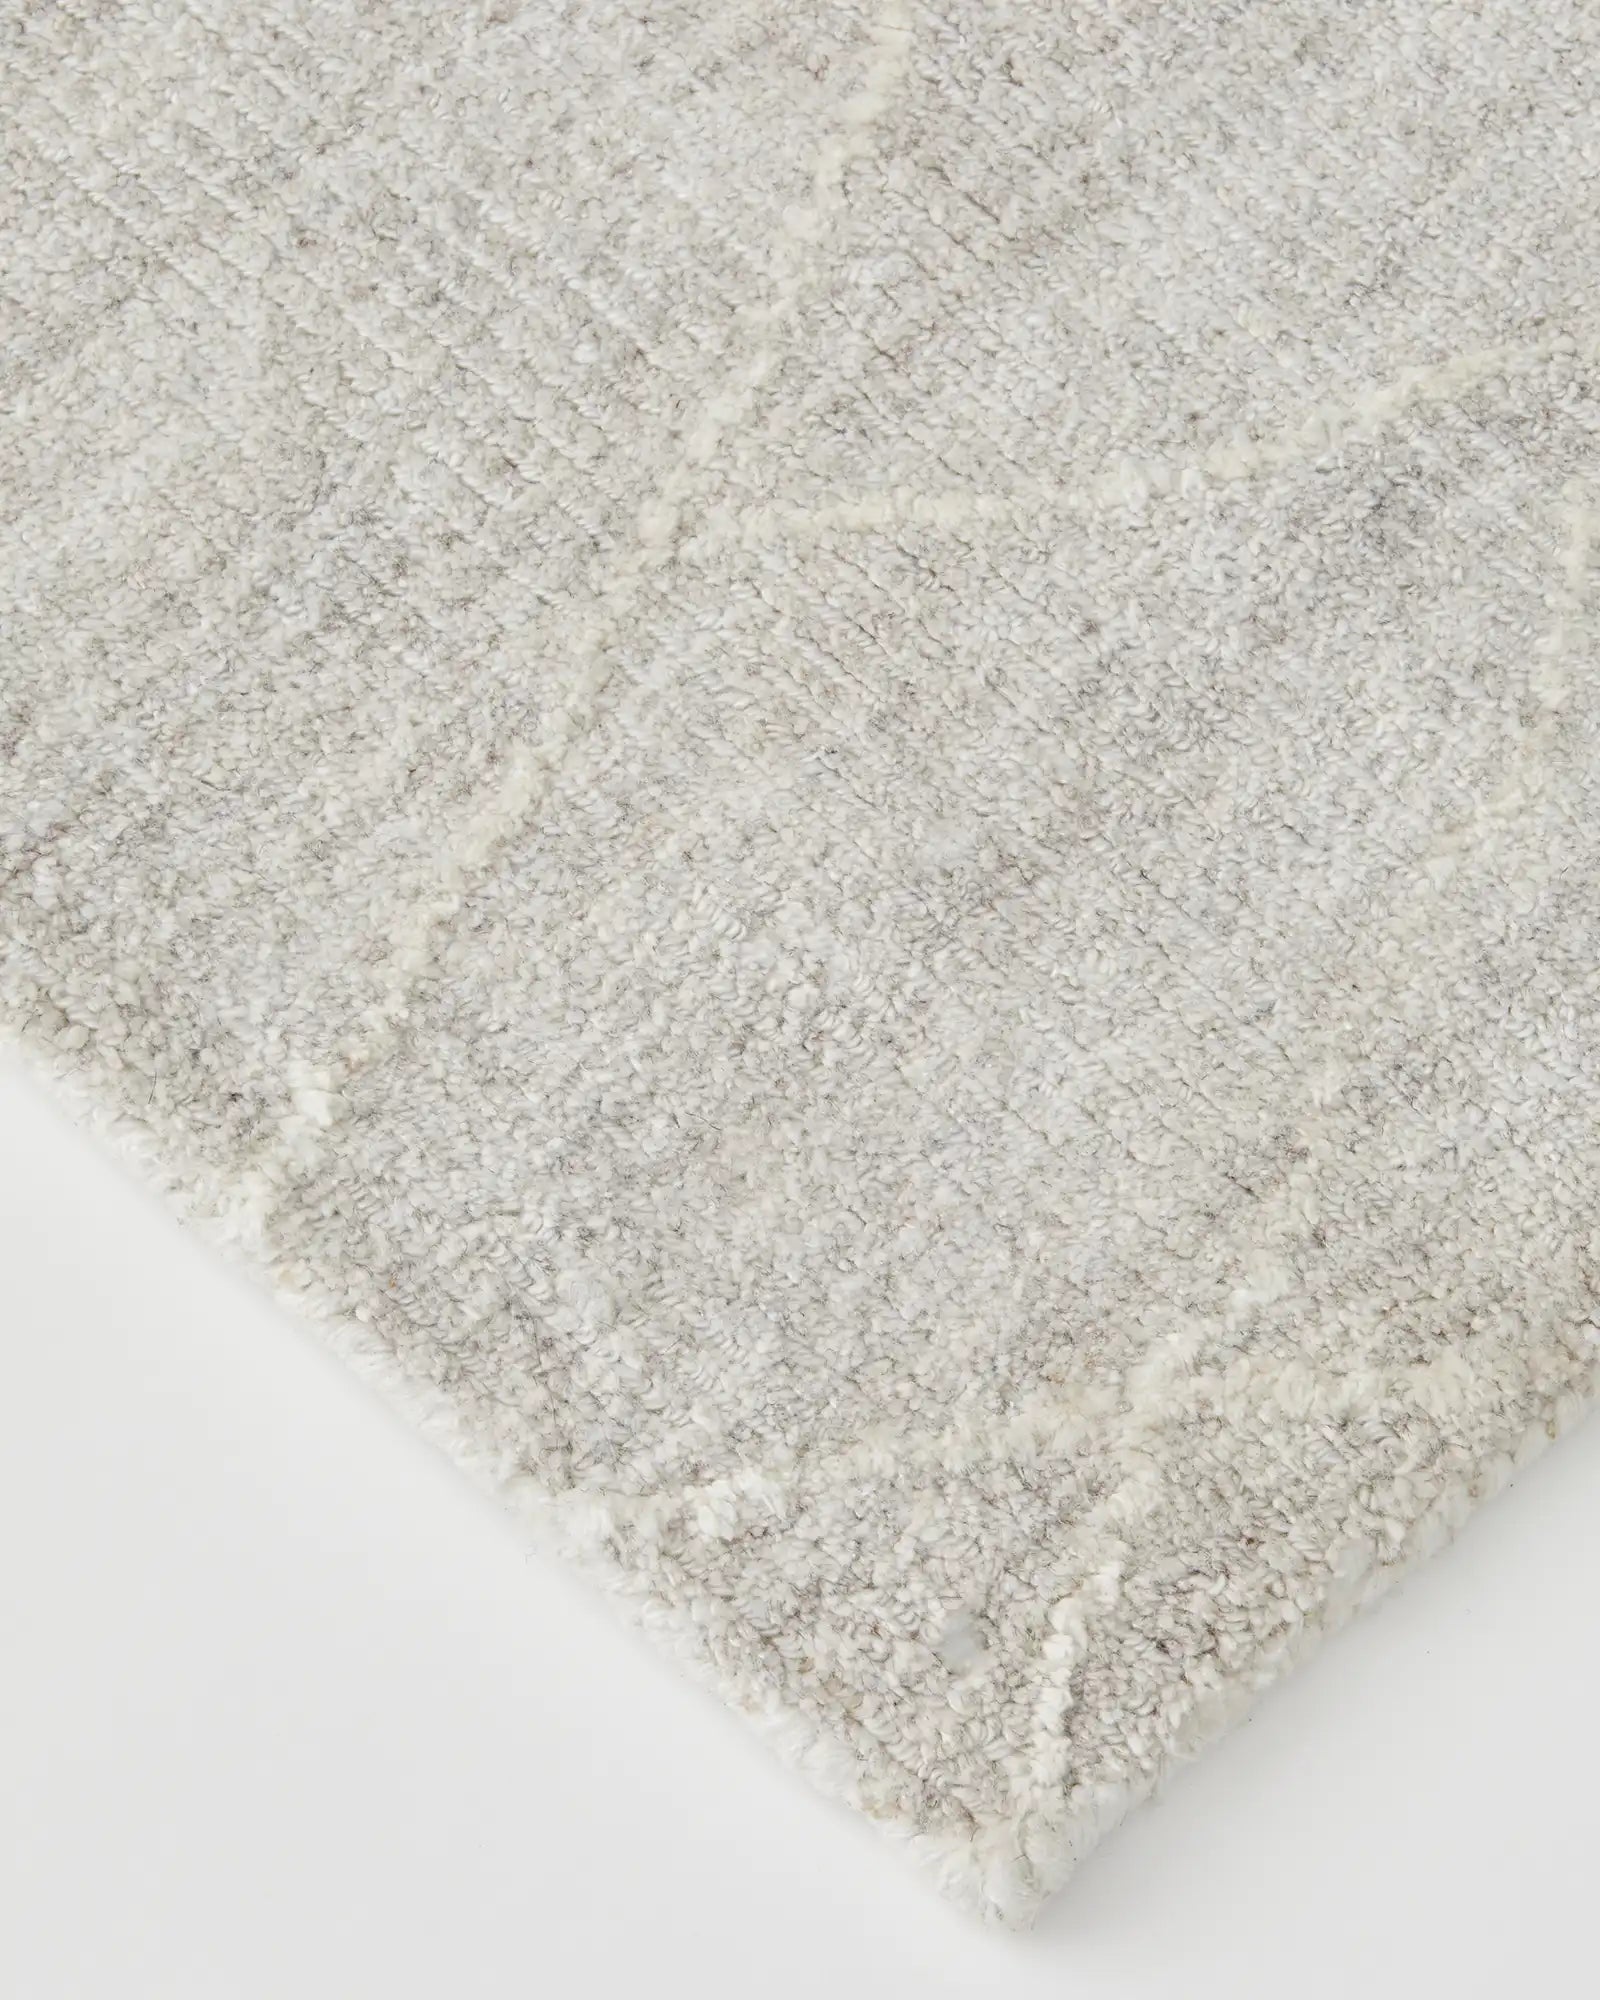 Angle shot of the rug's edge, showing the fine finishing and loom-knotted details.